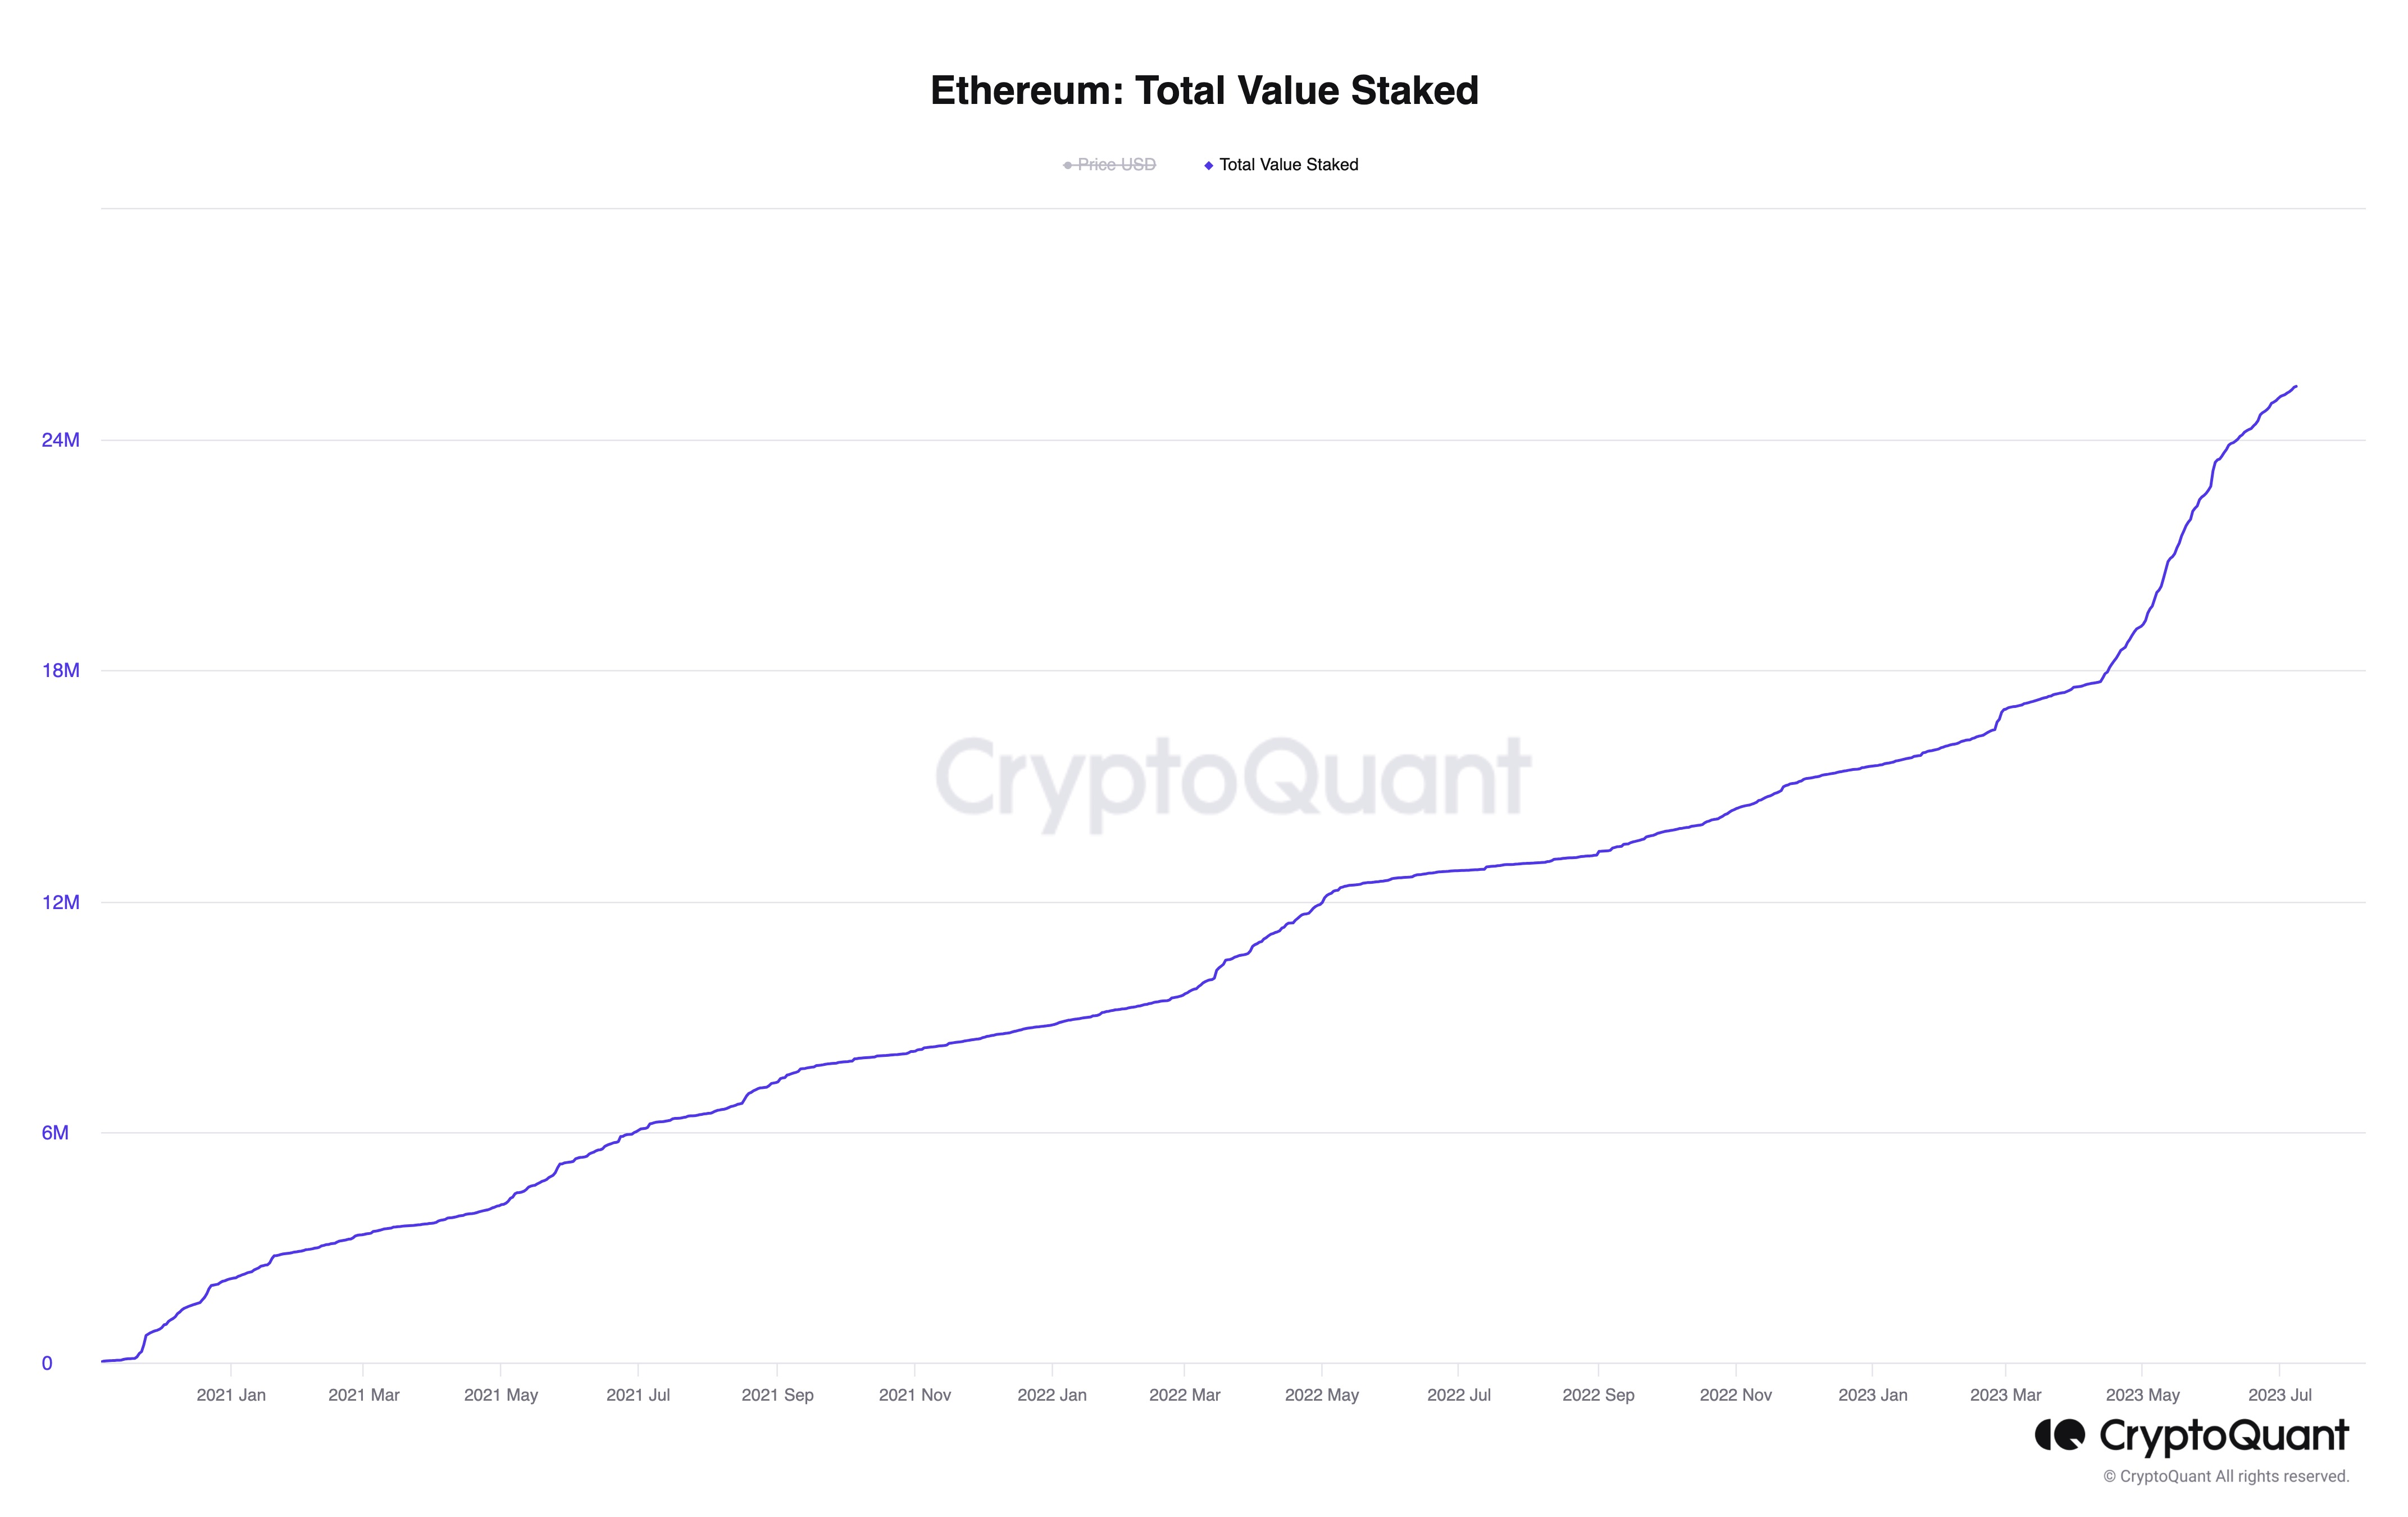 What will happen to Ethereum’s staking yield?